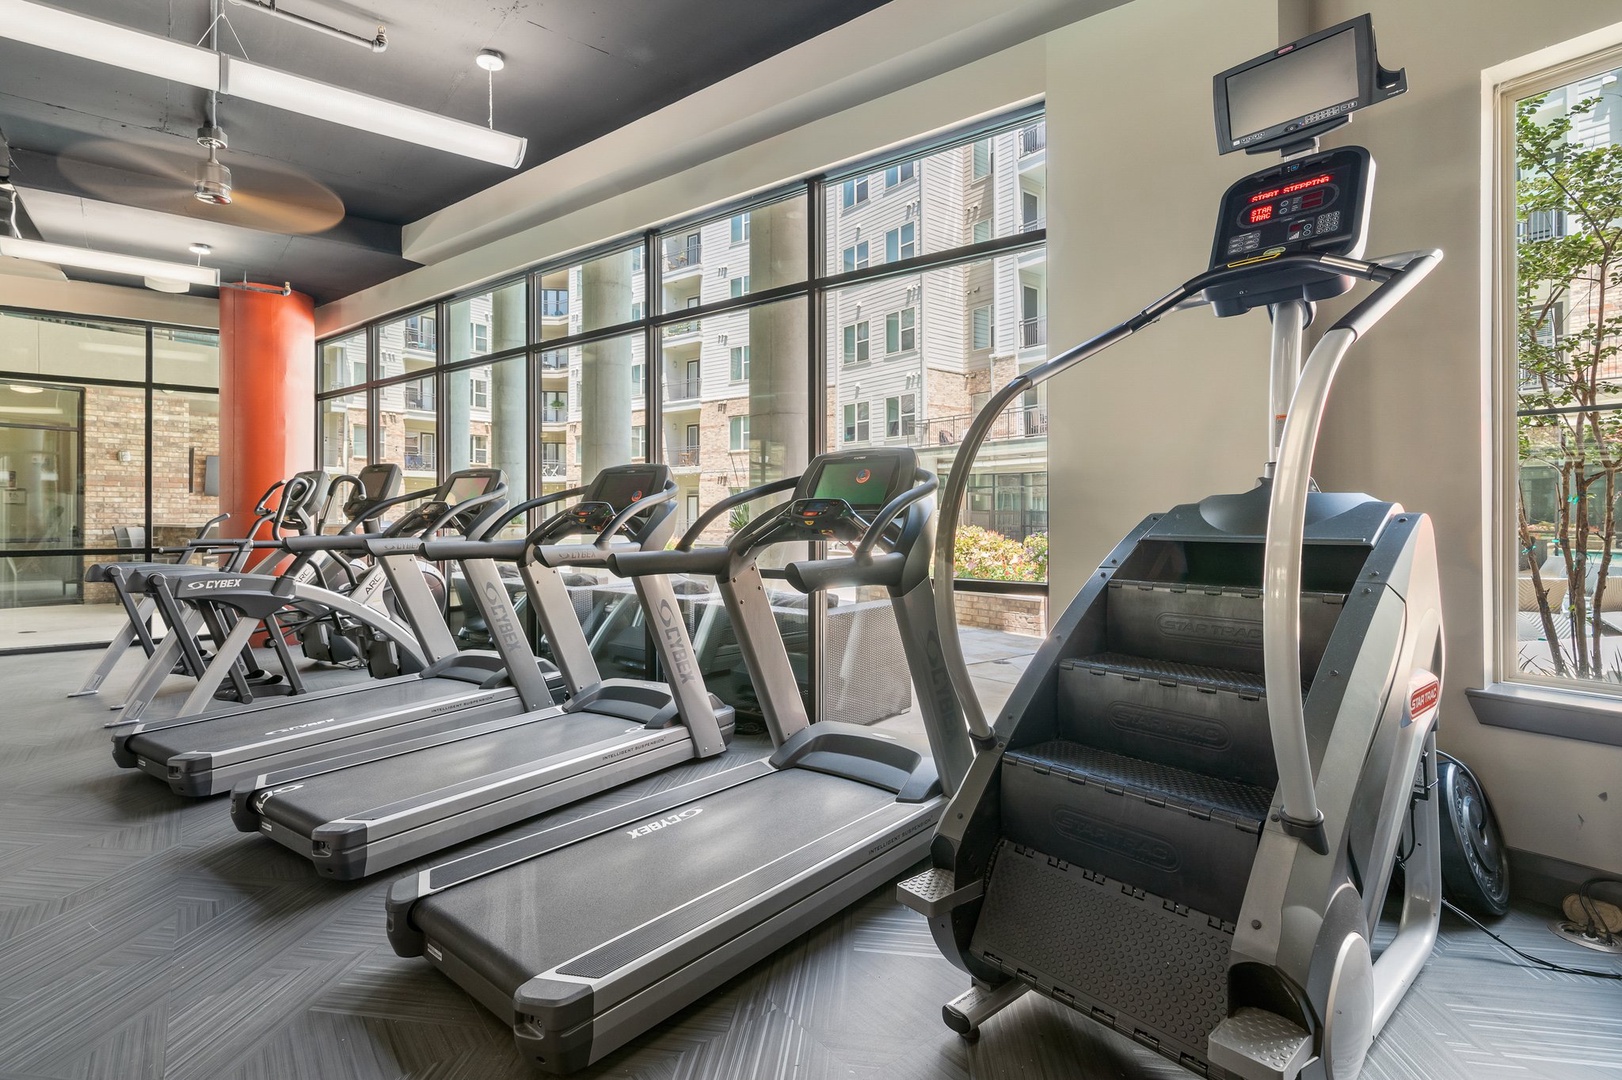 Lodgeur at Elan Med Center has a 24/7 fitness center. Here's the cardio equipment